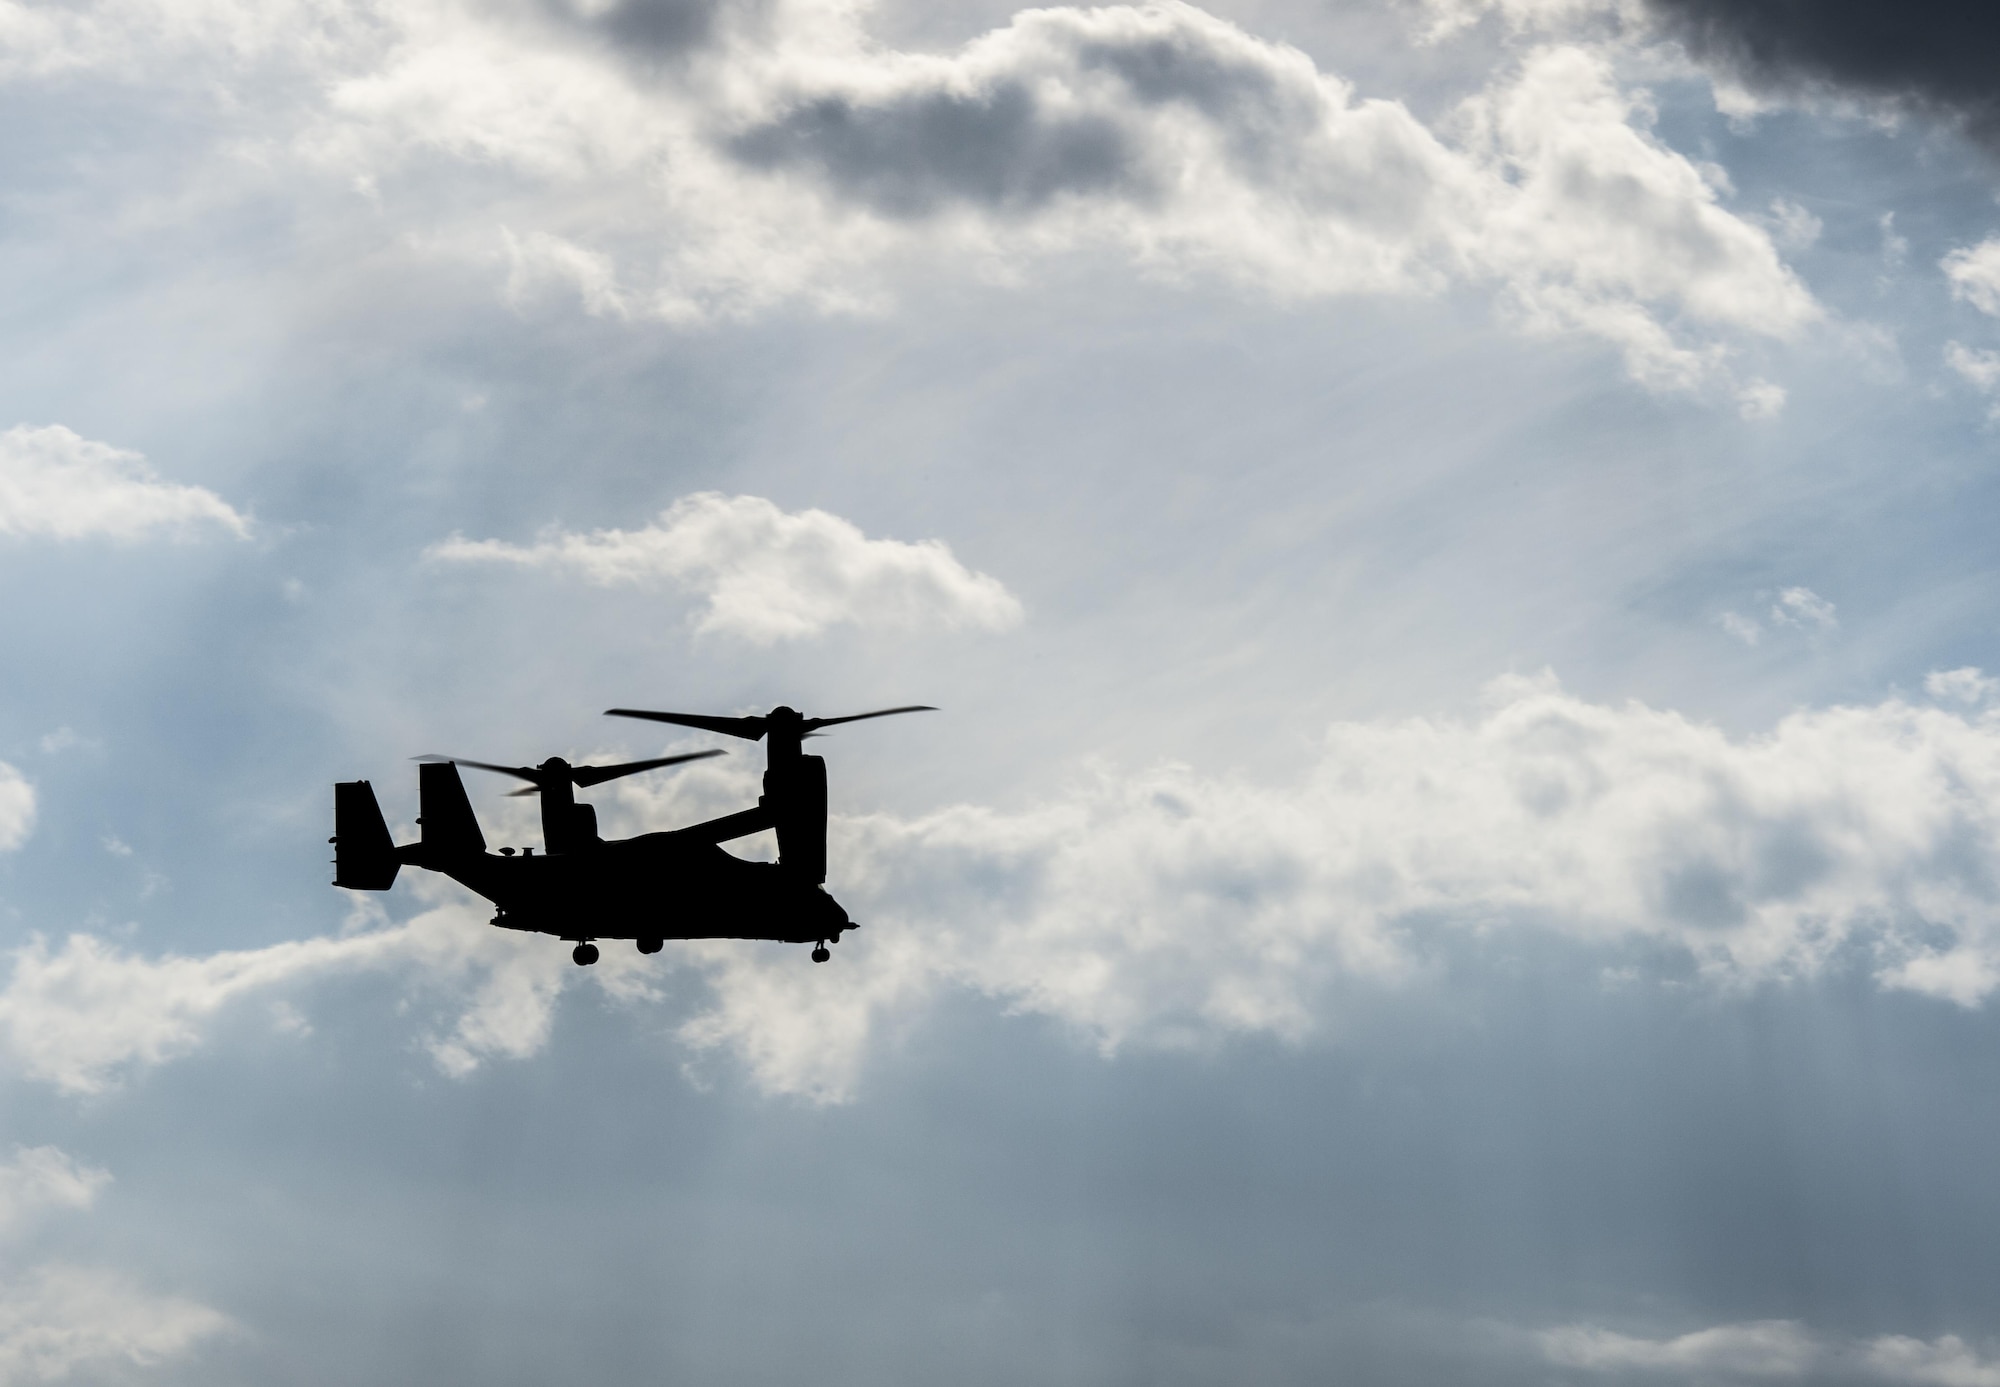 A CV-22 Osprey tiltrotor aircraft assigned to the 8th Special Operations Squadron flies over the Gulf of Mexico during a training mission, Nov. 30, 2016. The Osprey combines the vertical takeoff, landing and hover capabilities of a helicopter with the long-range, fuel efficient and speed characteristics of a turboprop aircraft. (U.S. Air Force photo by Airman 1st Class Joseph Pick)